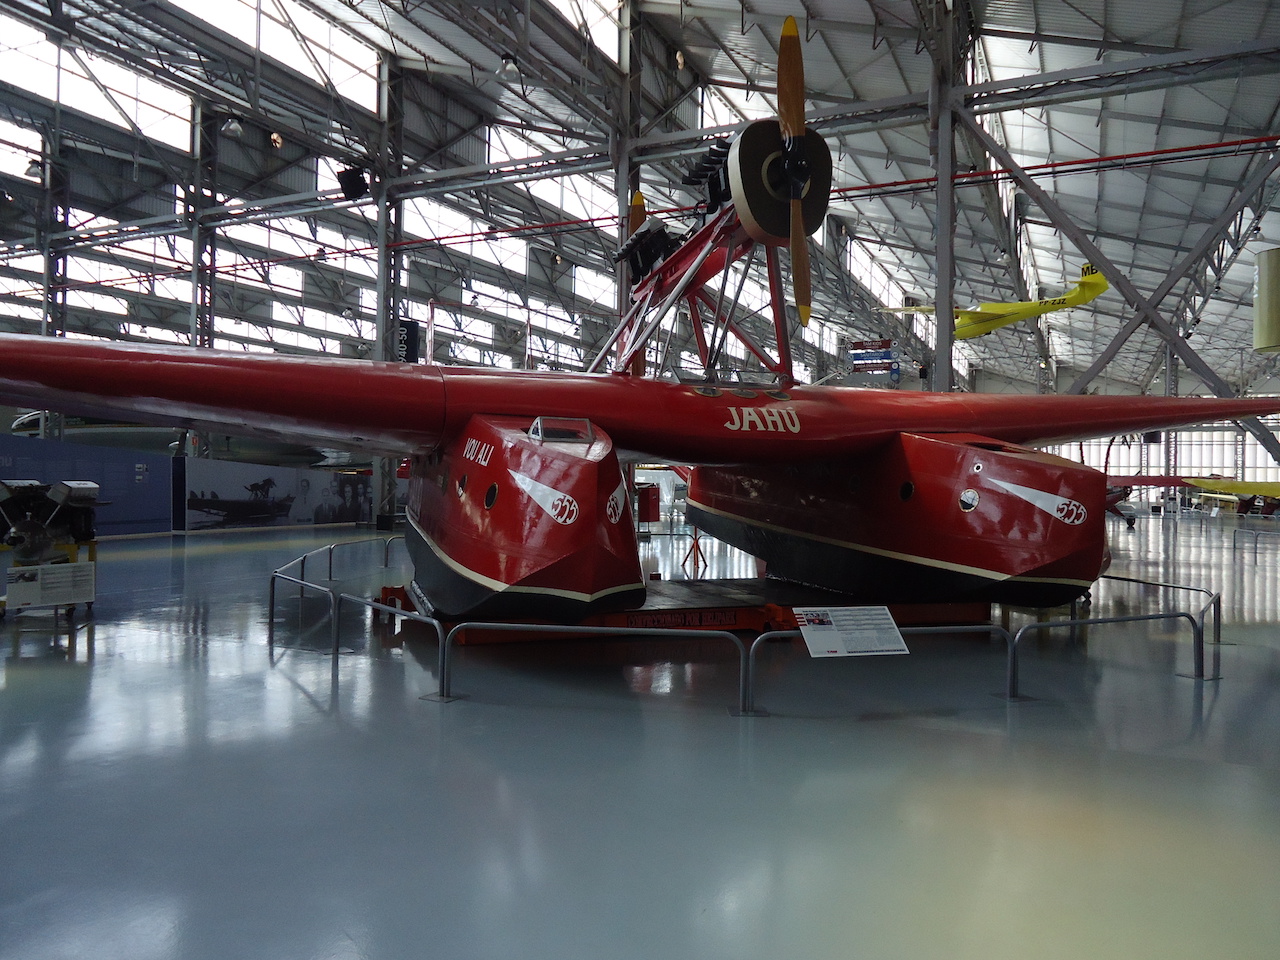 The last remaining example is preserved in Brazil, at the TAM "Asas de um sonho" museum, at São Carlos, São Paulo. The aircraft, registered I-BAUQ and named "Jahú", was the S.55 used by Commander João Ribeiro de Barros in his crossing of the South Atlantic in 1927.